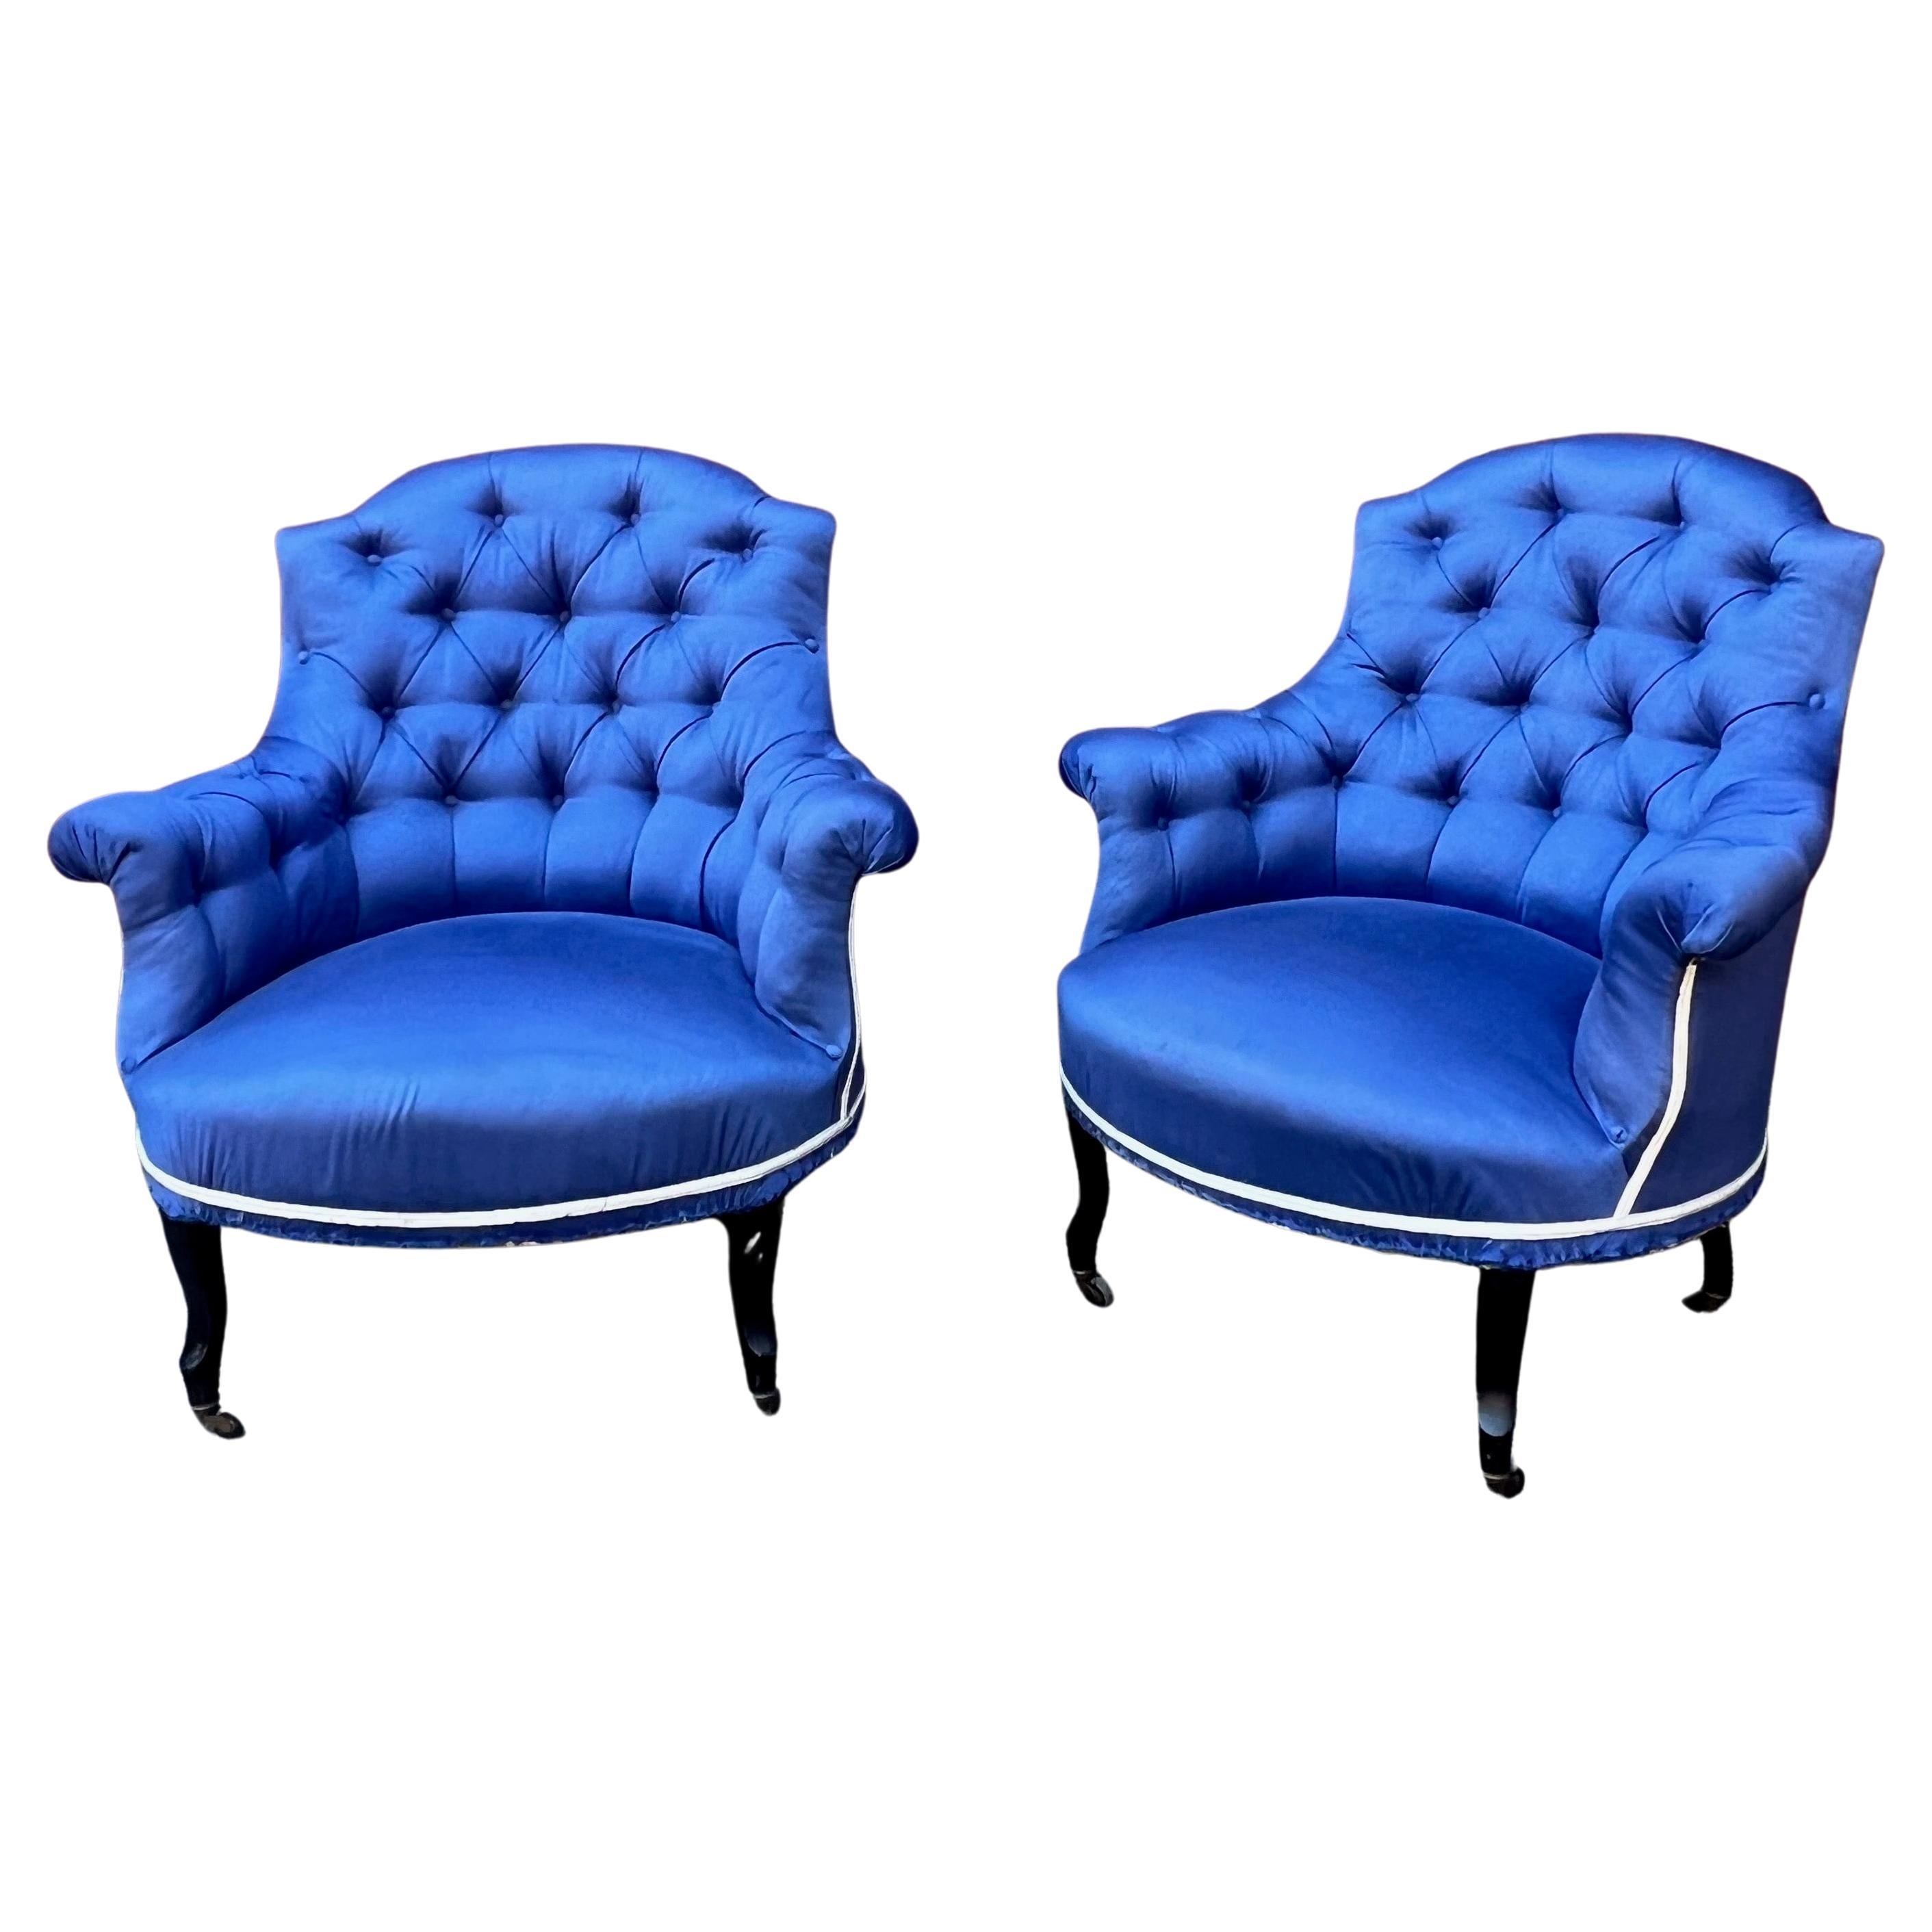 Pair of French Napoleon III Blue Tufted Armchairs